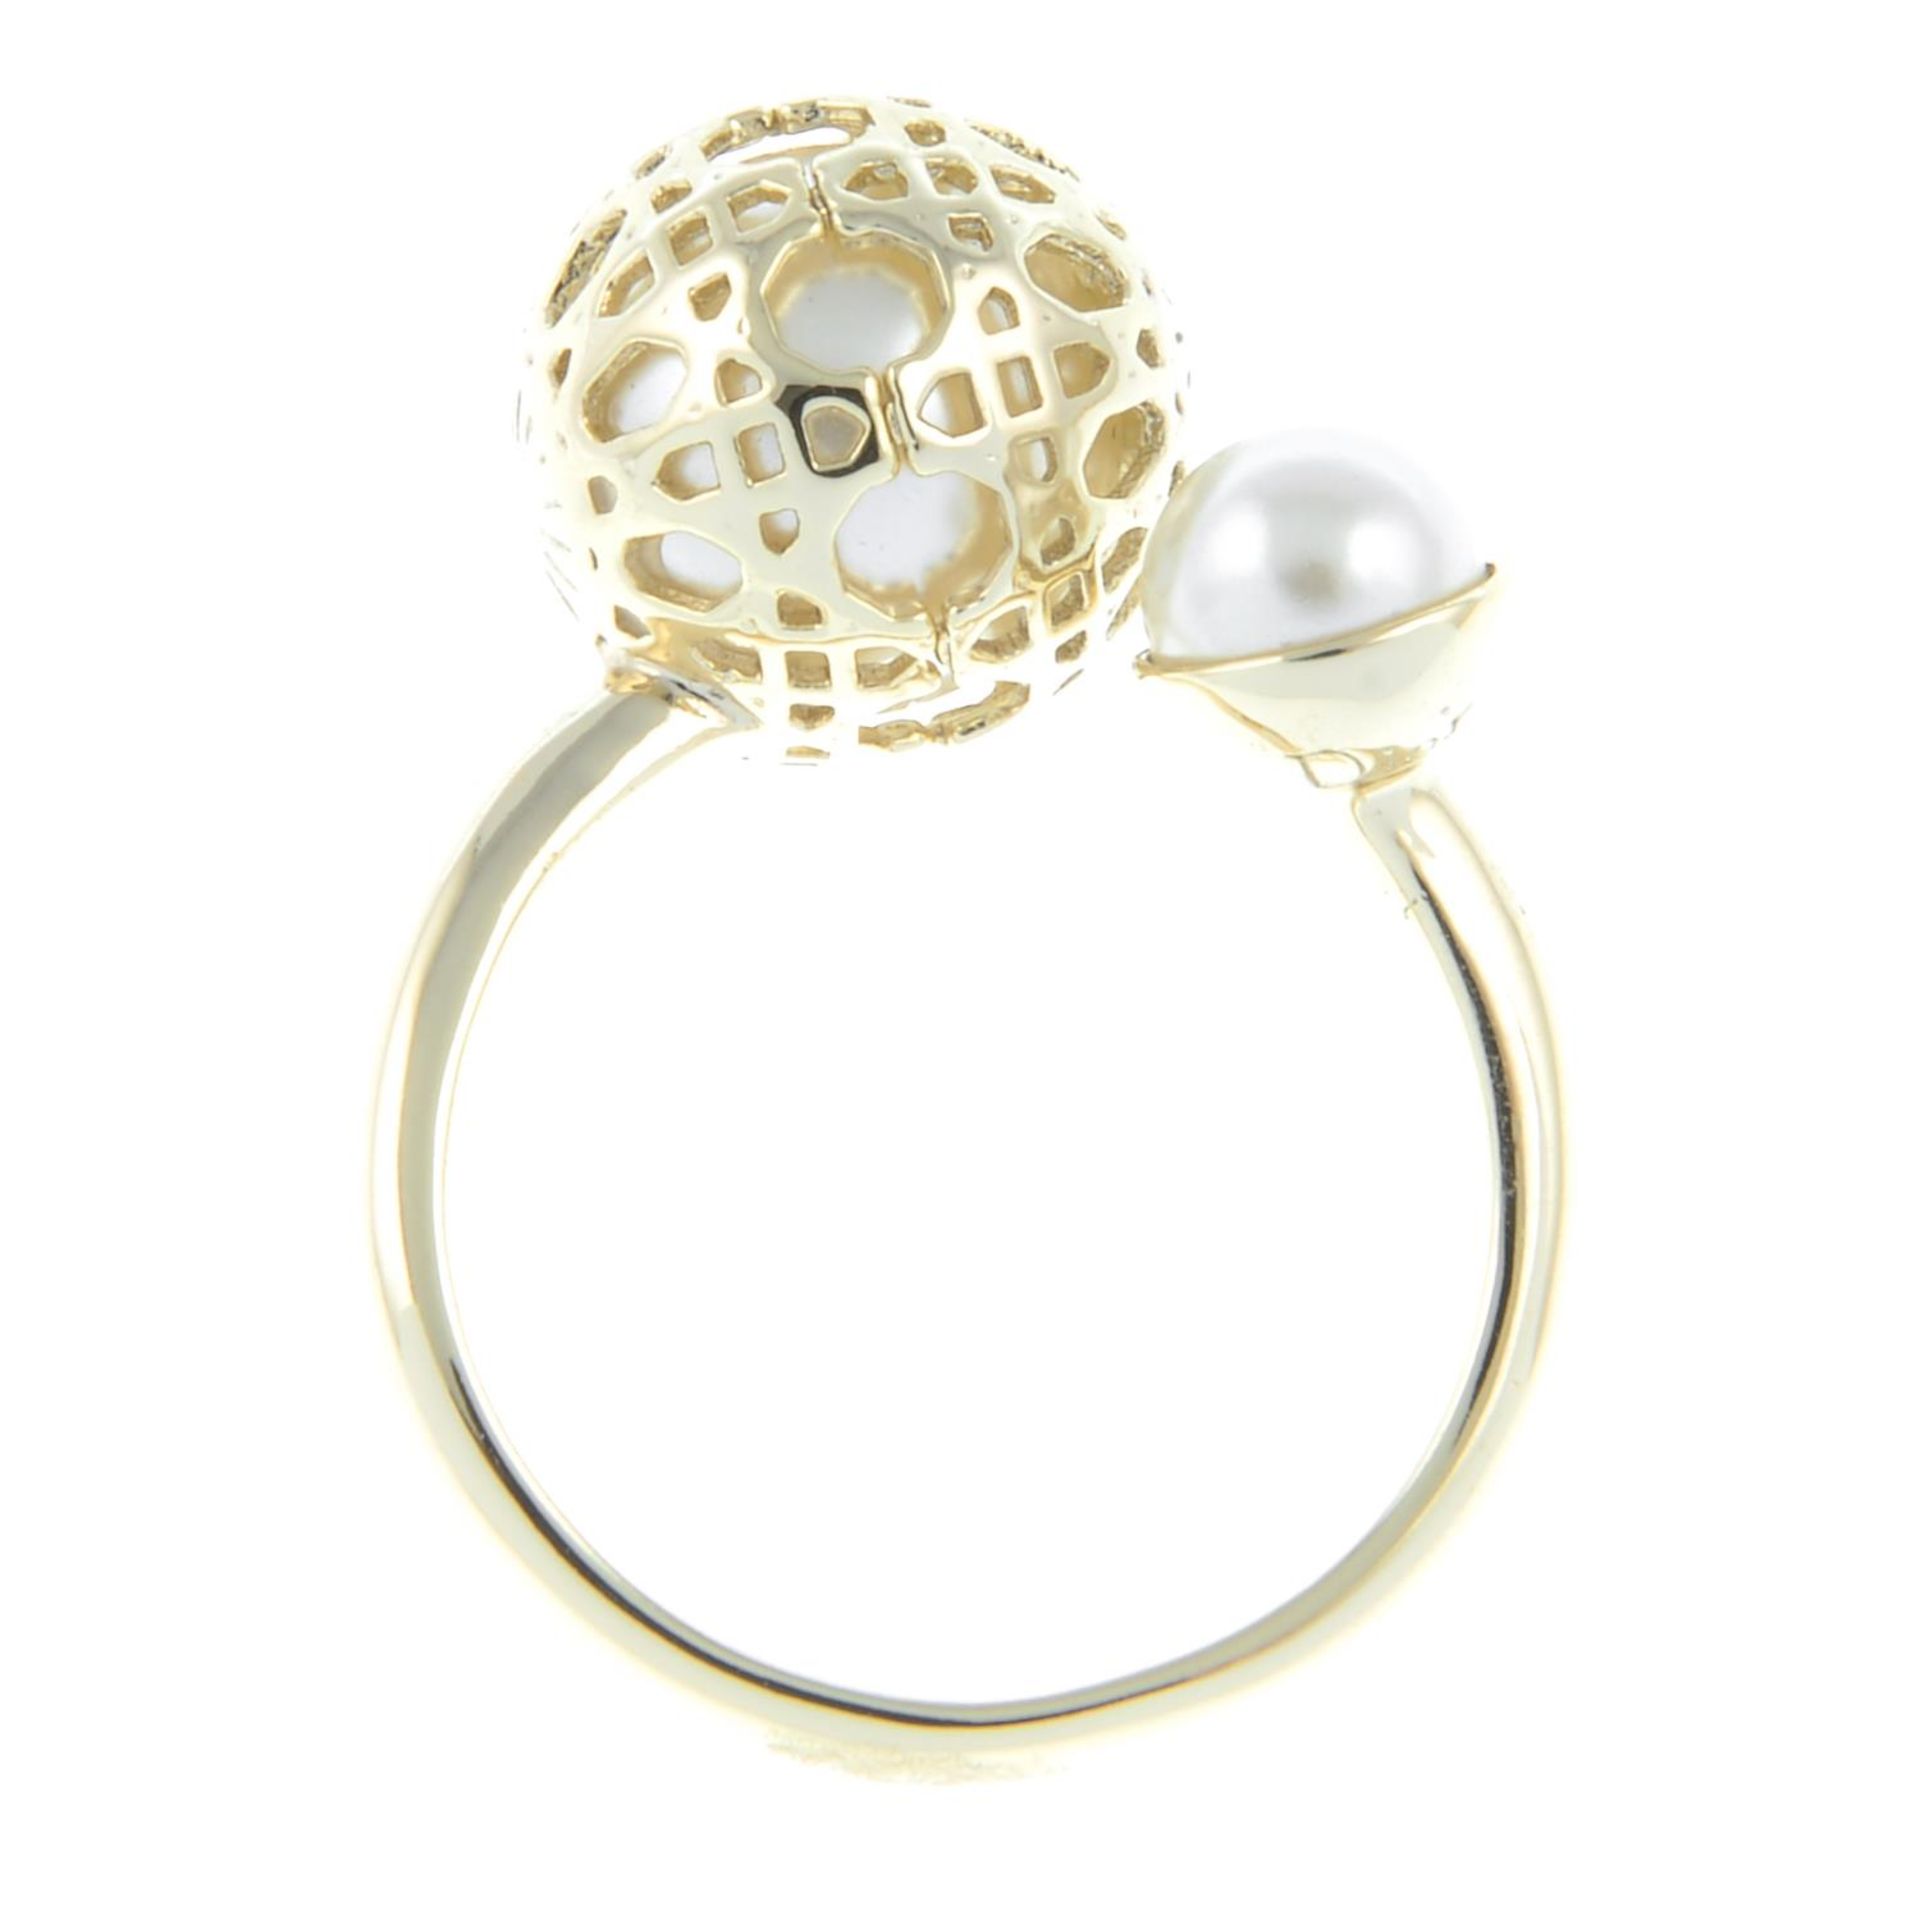 CHRISTIAN DIOR - a Tribal Pearl ring. - Image 2 of 3